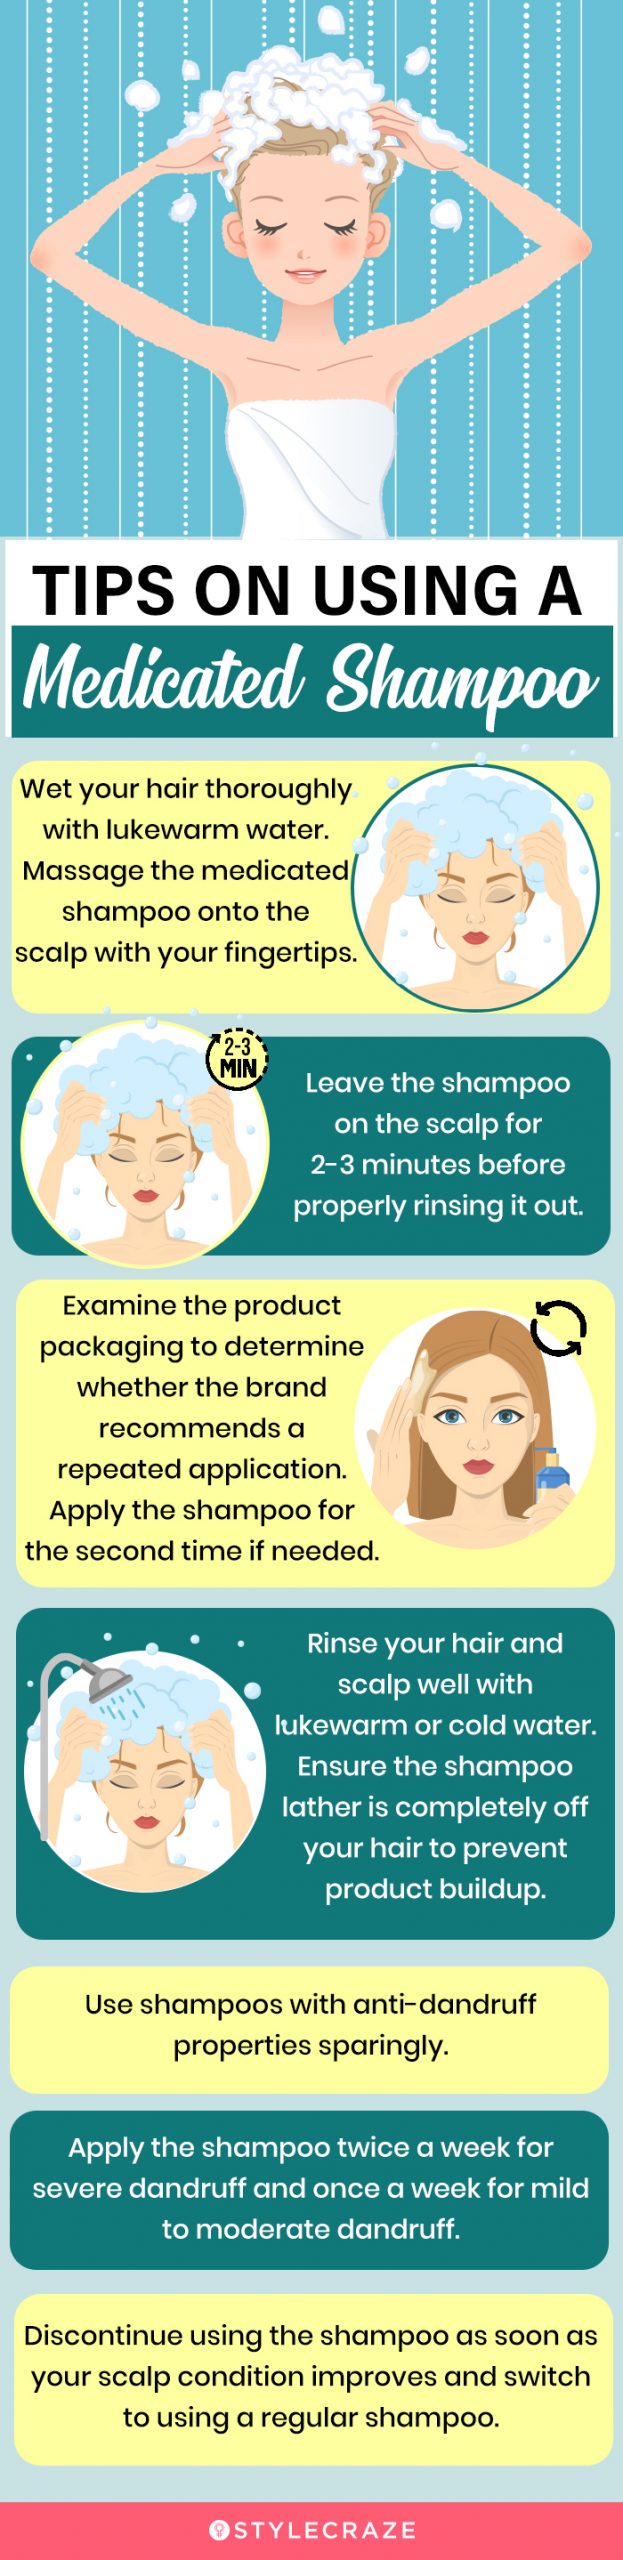 Tips On Using A Medicated Shampoo (infographic)